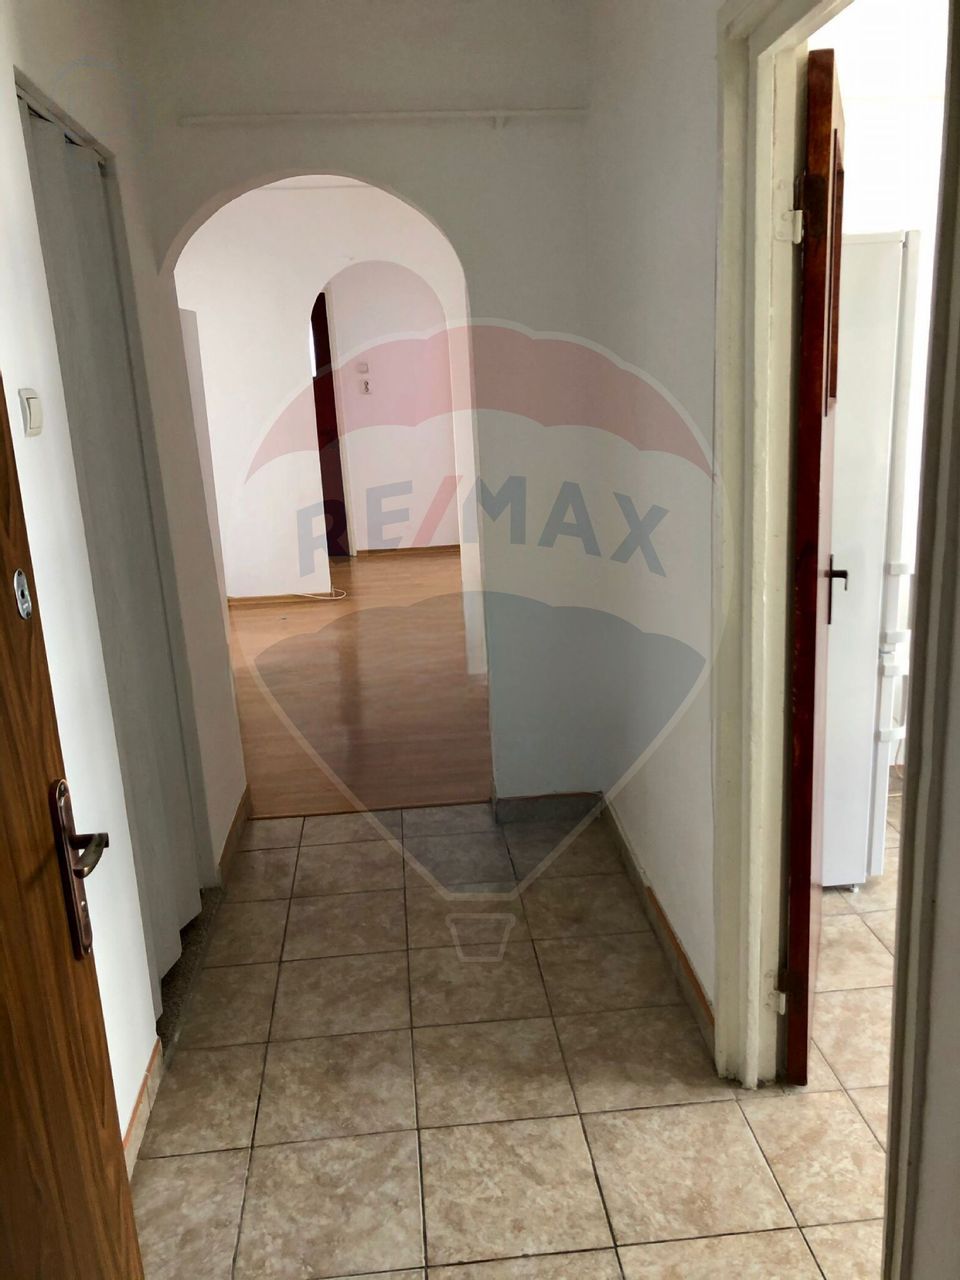 3 room Apartment for sale, Doamna Ghica area